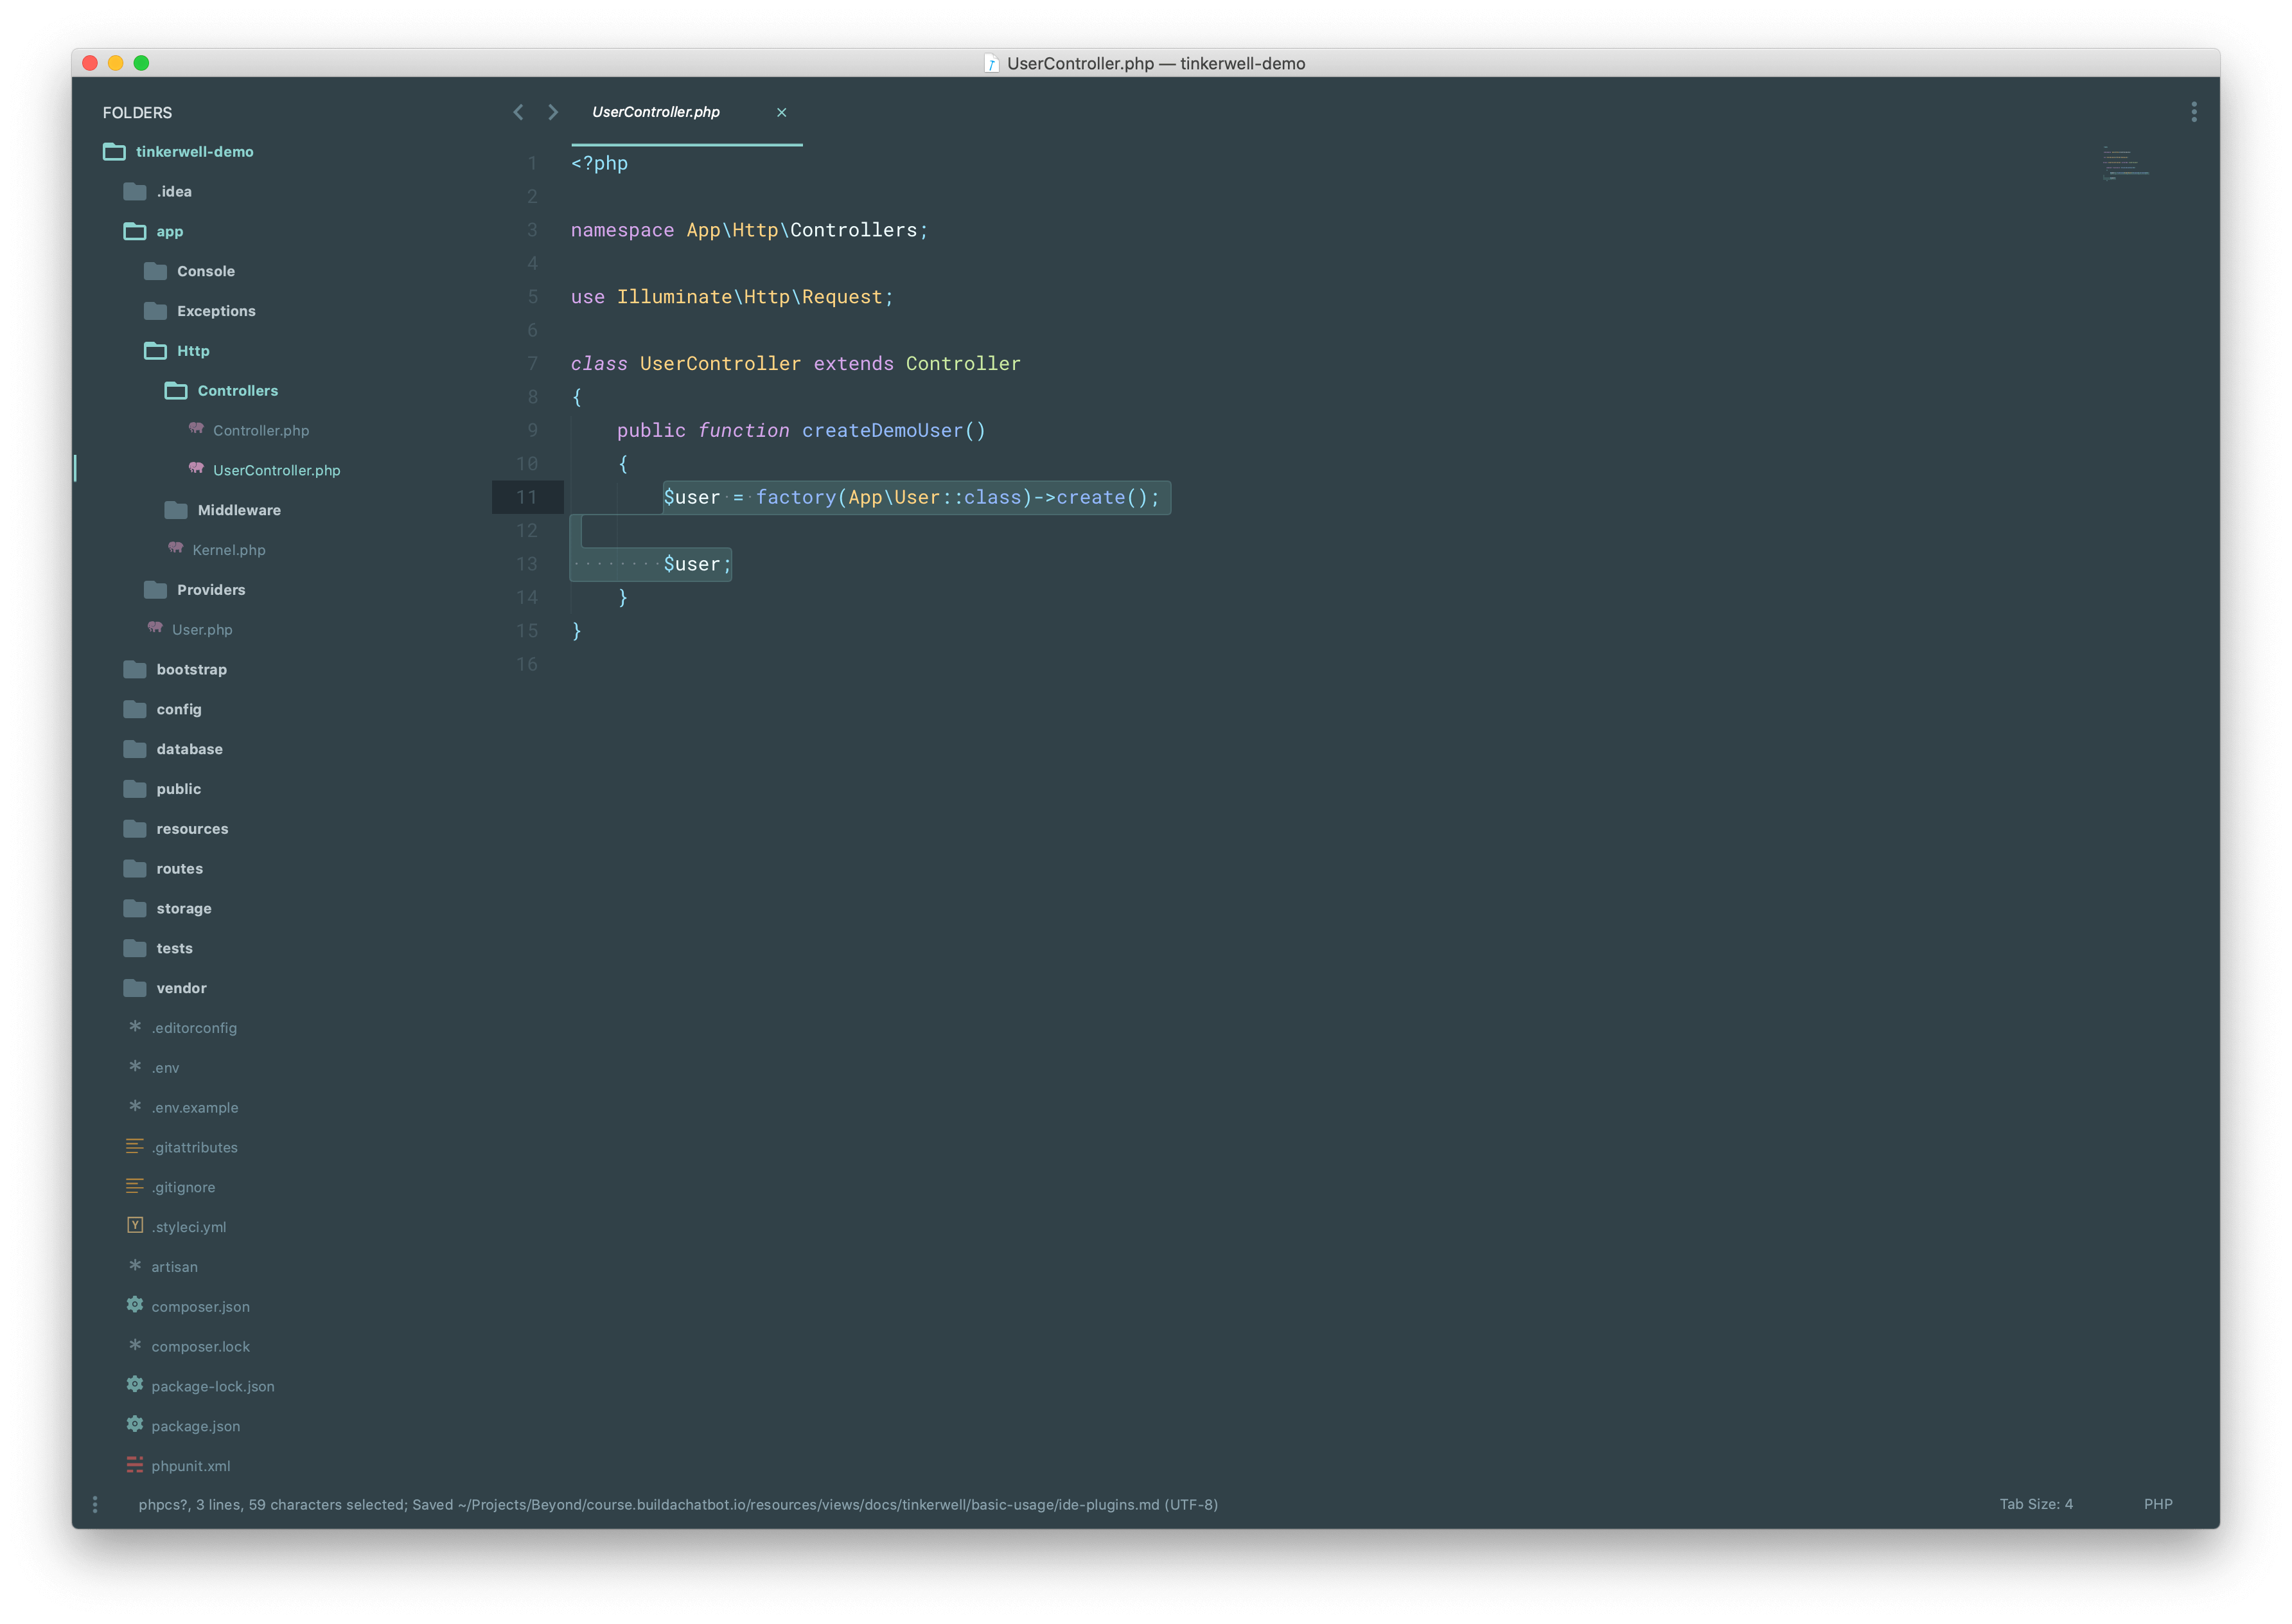 Screenshot of Tinkerwell in Sublime Text 3